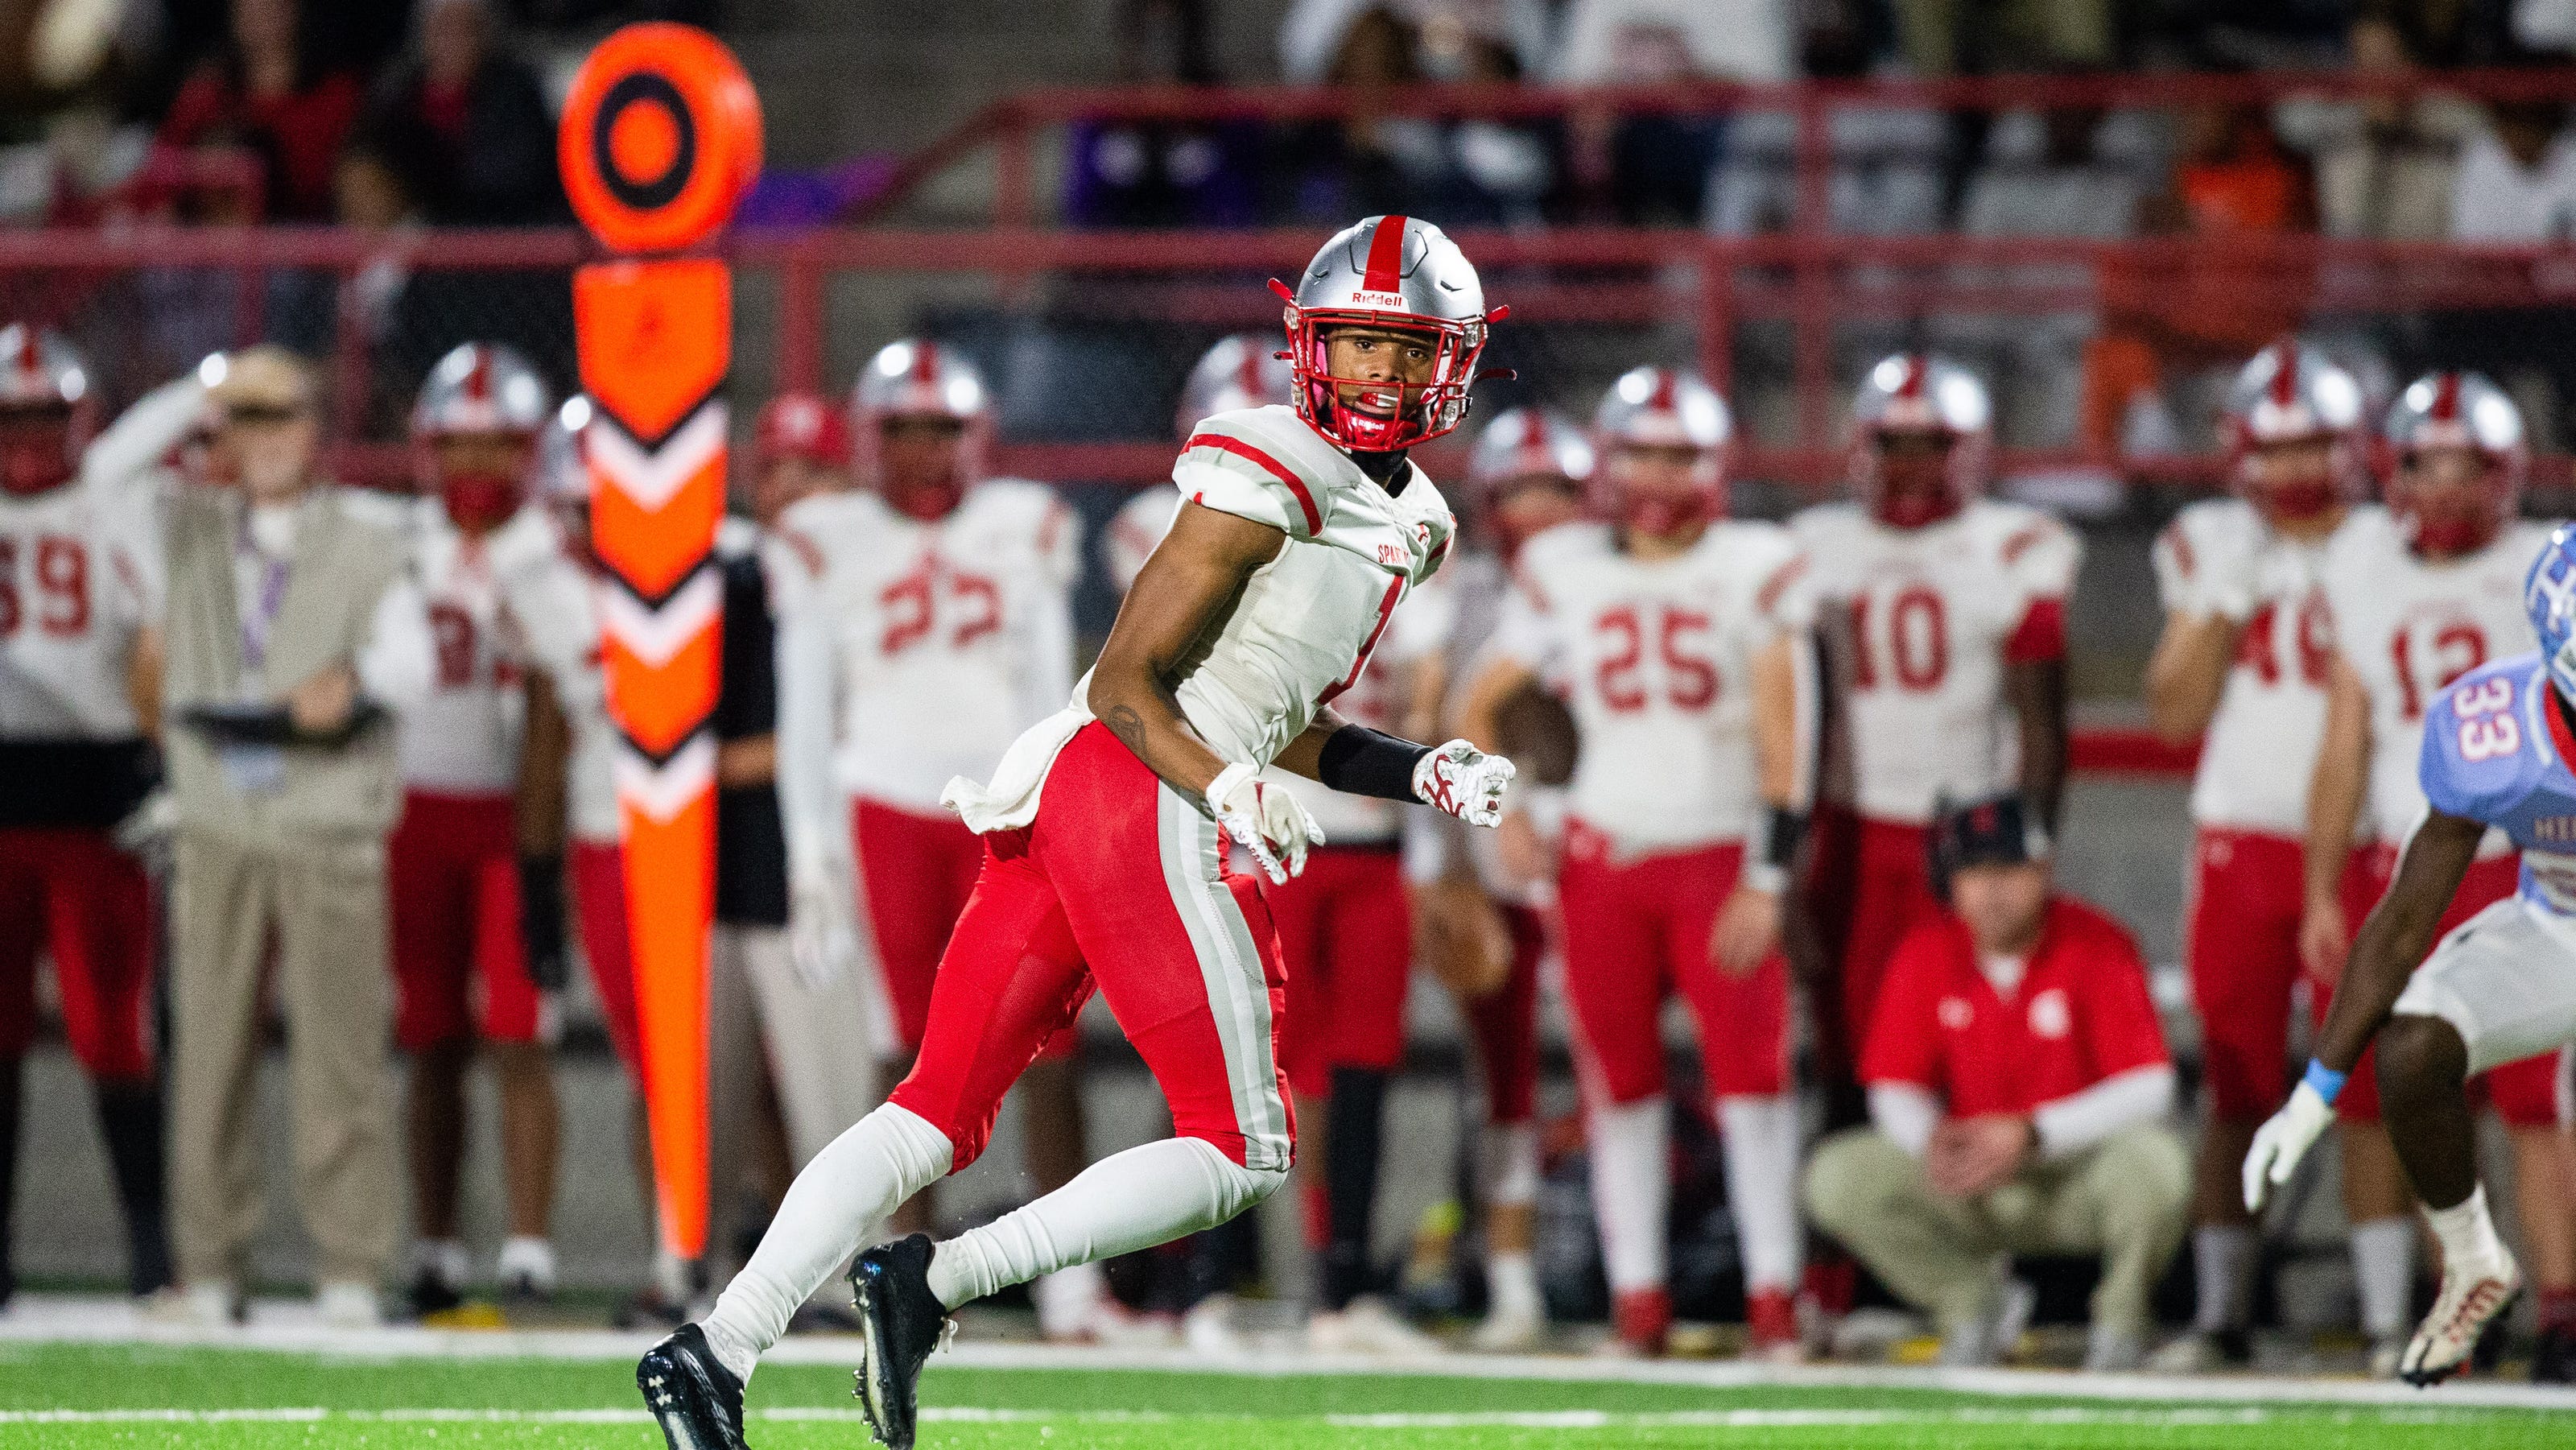 Ryan Williams scores six TDs, Saraland routs Hillcrest in AHSAA football